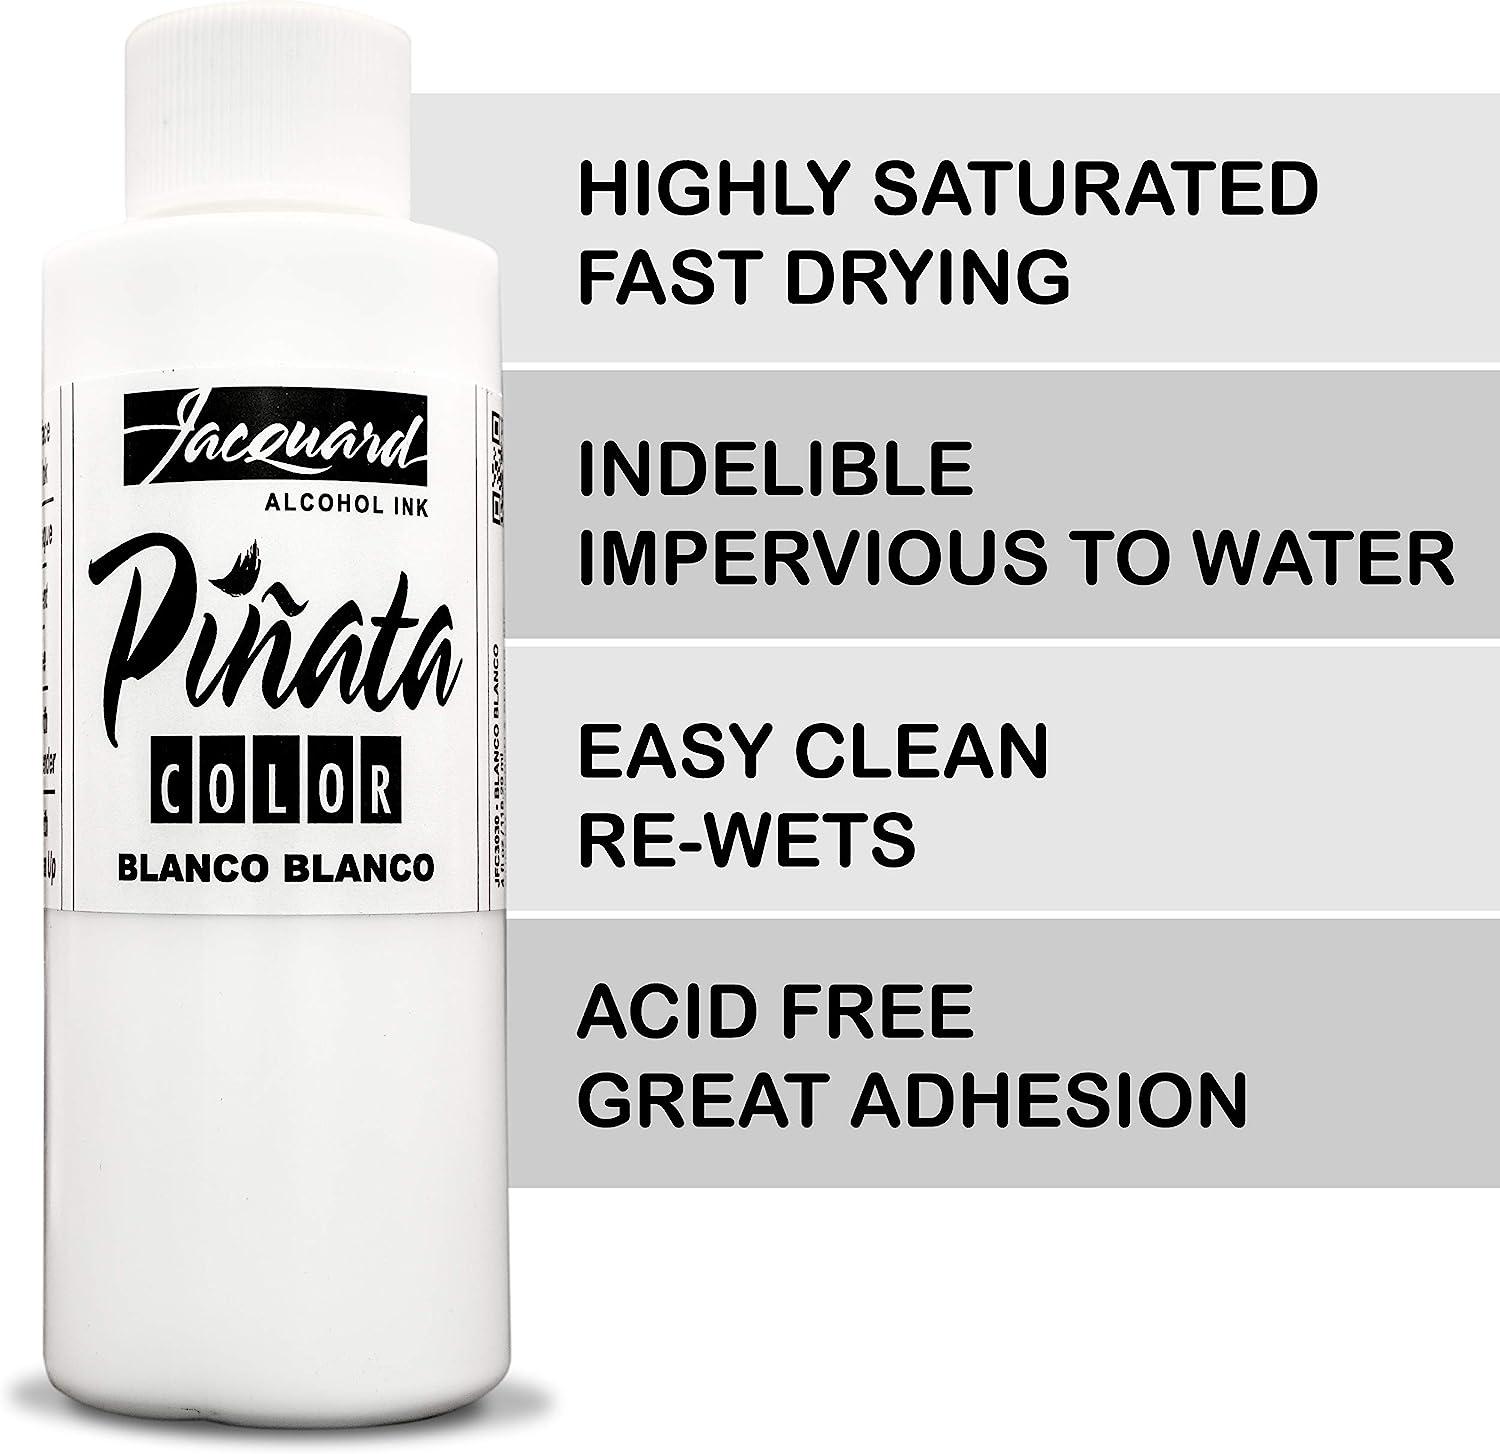 Jacquard Pinata White Alcohol Ink Made in USA - Blanco Blanco Color 4fl oz  - Works Great with Resin and Yupo - Pinata Alcohol Inks - White Ink Bundled  with Moshify 20 mL Applicator Bottle